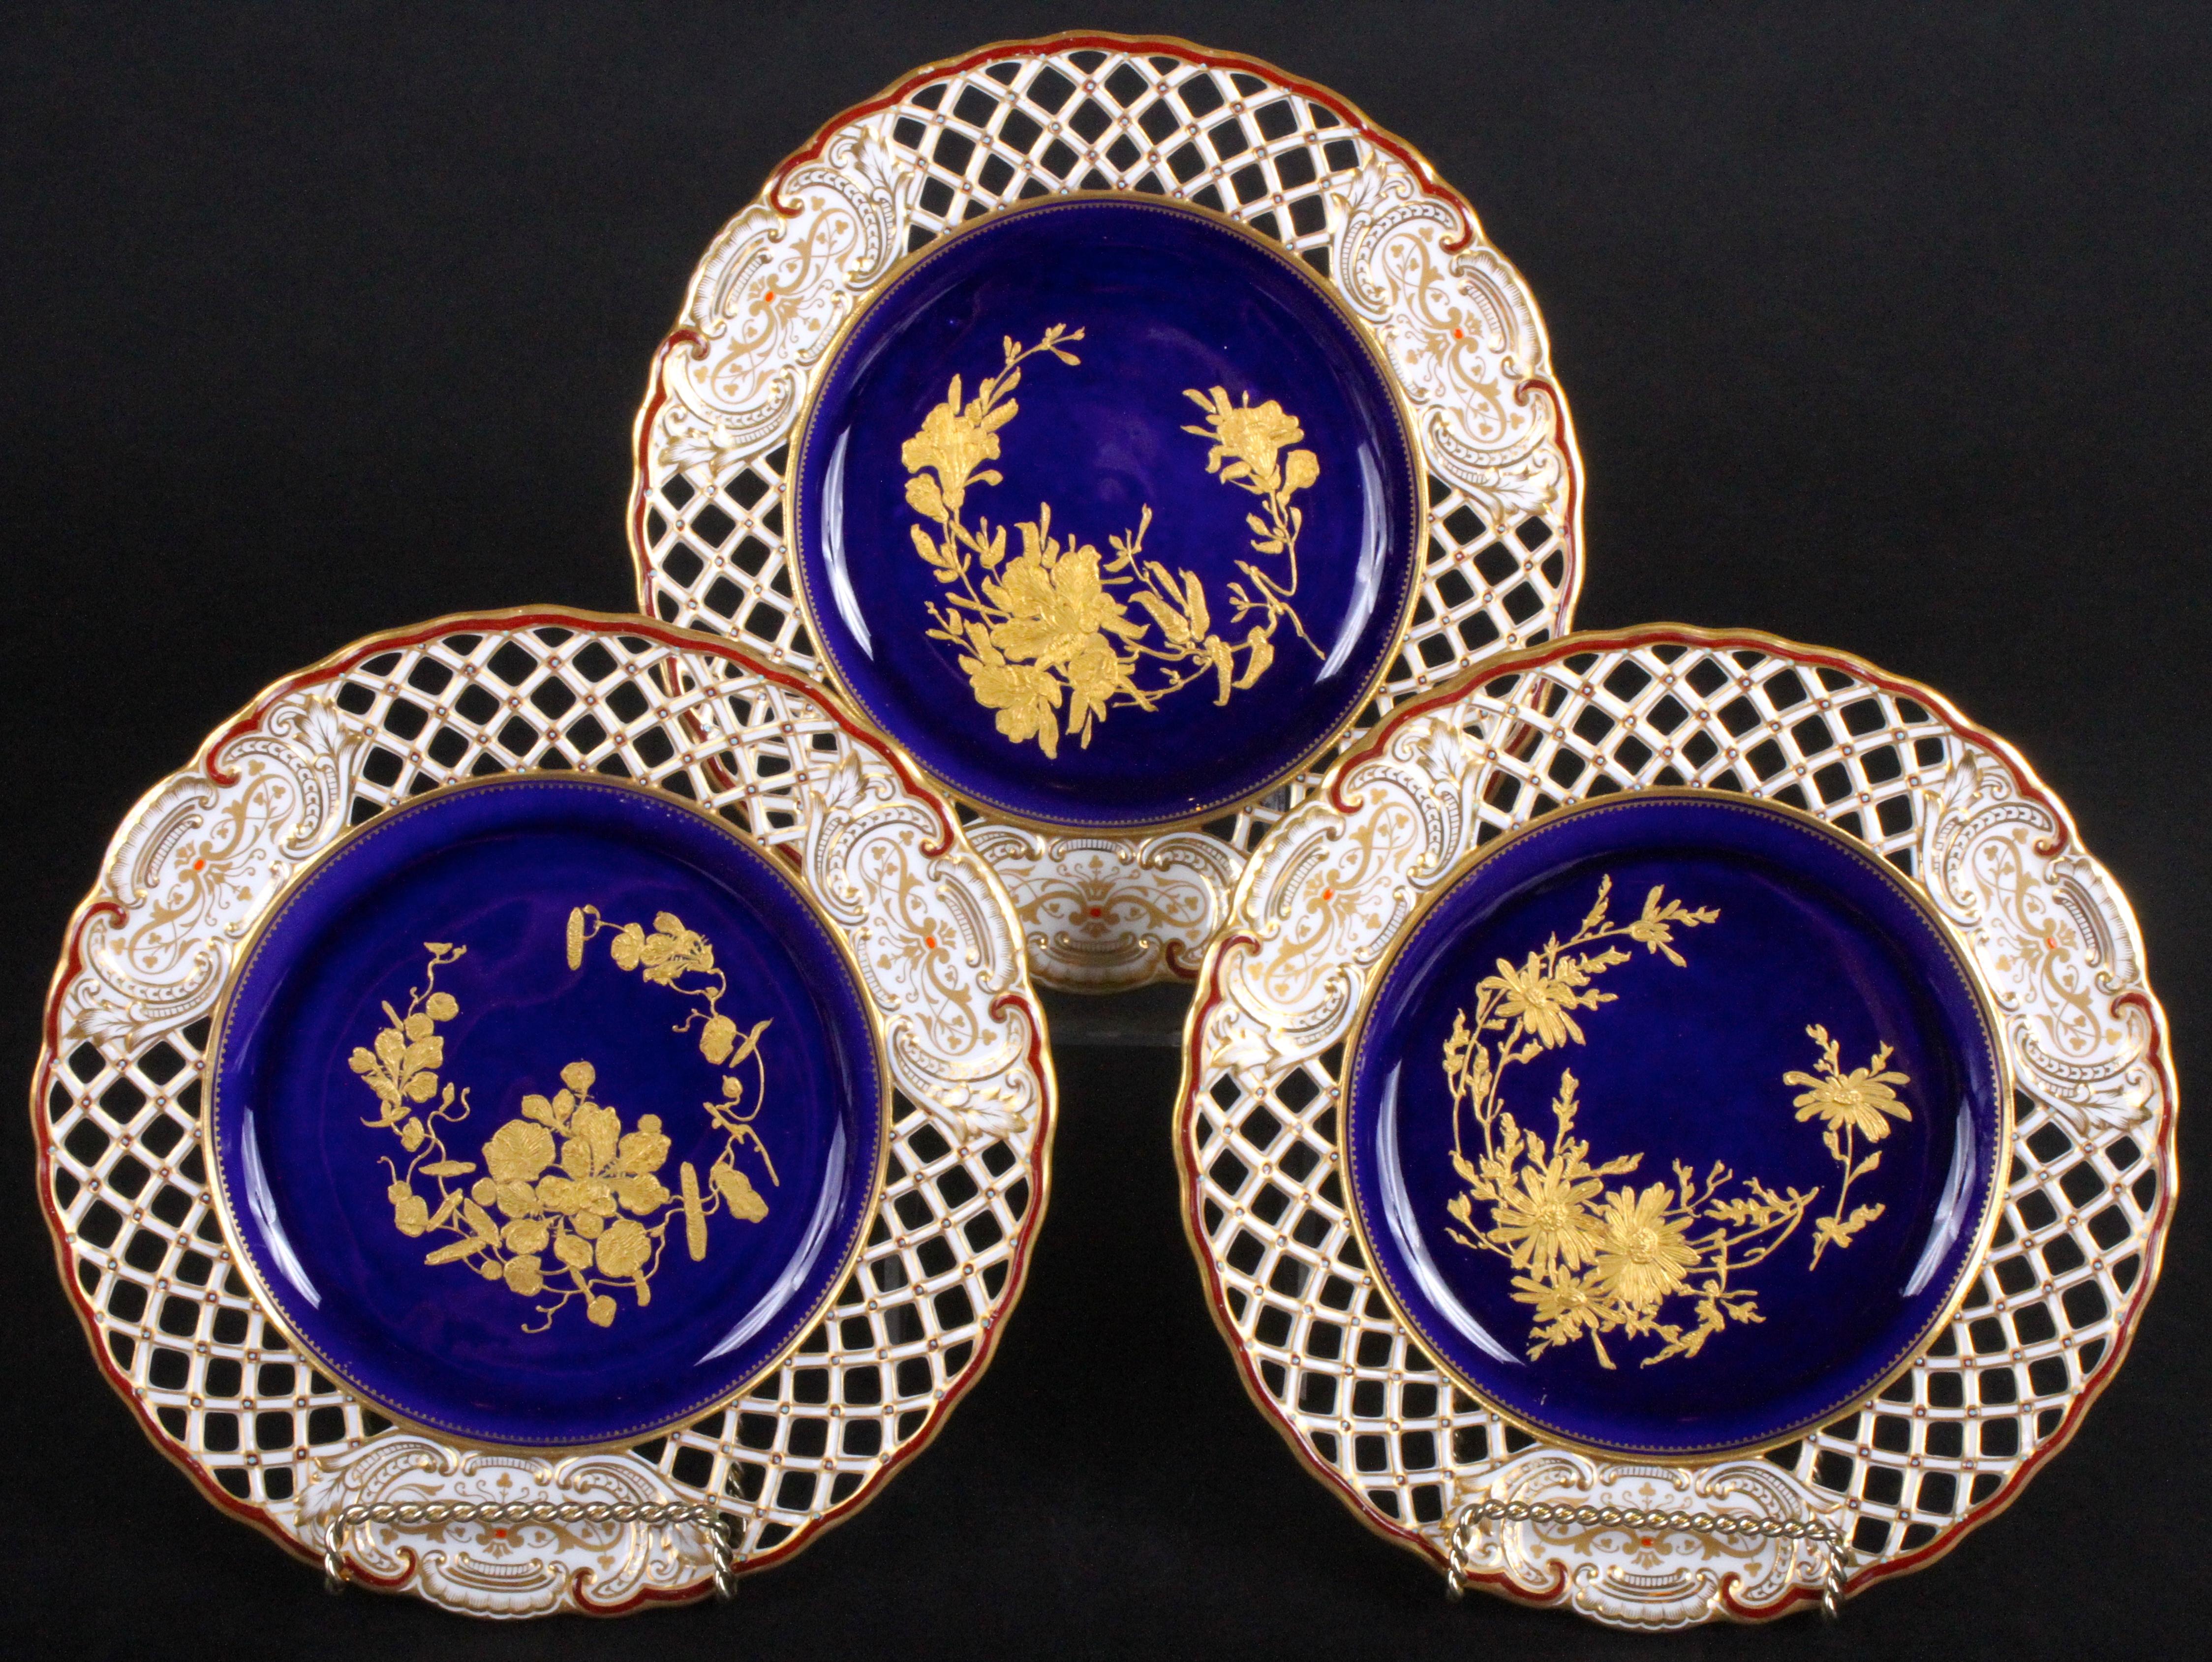 Aesthetic Movement Set of 10, 19th Century Wedgwood Queensware Cobalt and Gilt Plates For Sale